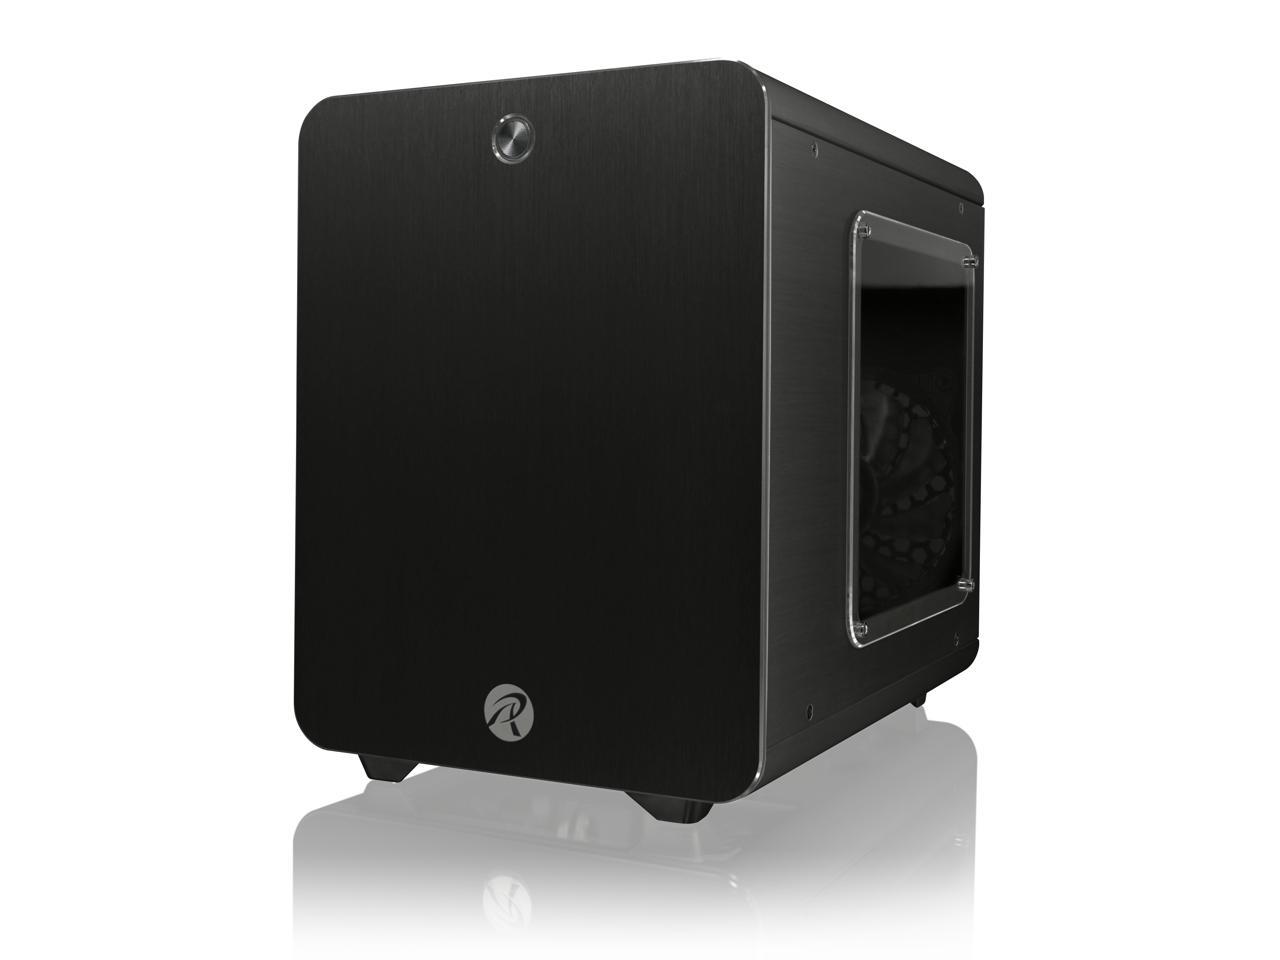 RAIJINTEK METIS PLUS BLACK, a Alu. M-ITX Case, is with one 12025 LED fan at rear, USB 3.0* 2, Ventilate holes at top, Compatible with Standard ATX PSU, 170mm VGA Card length, 160mm CPU Cooler heigth.